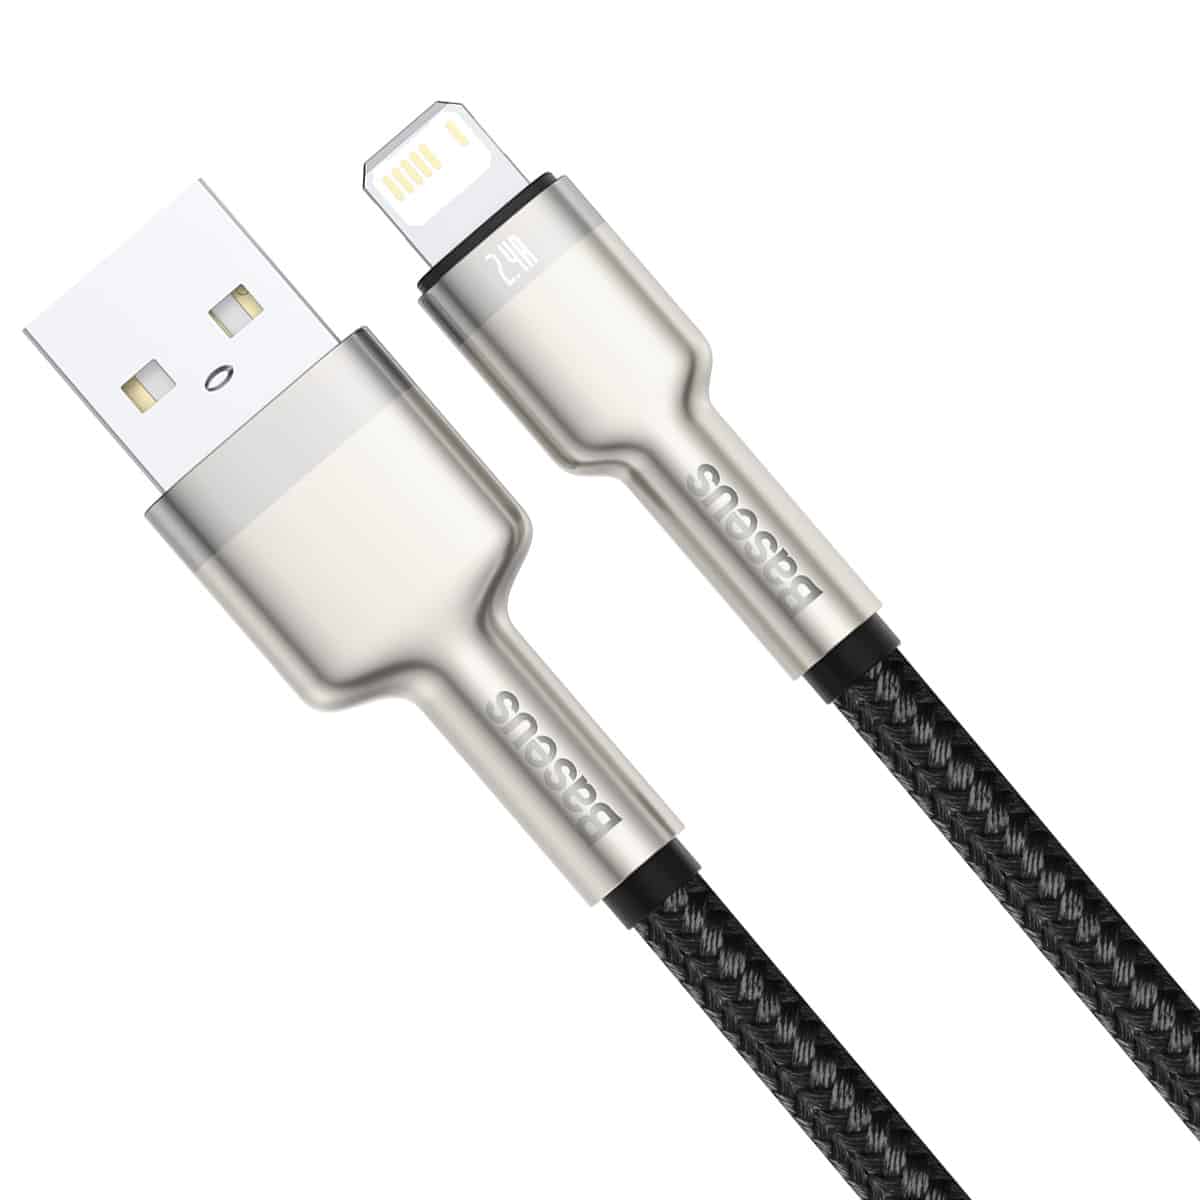 Baseus Cafule Series Metal Data Cable USB to iPhone 2.4A